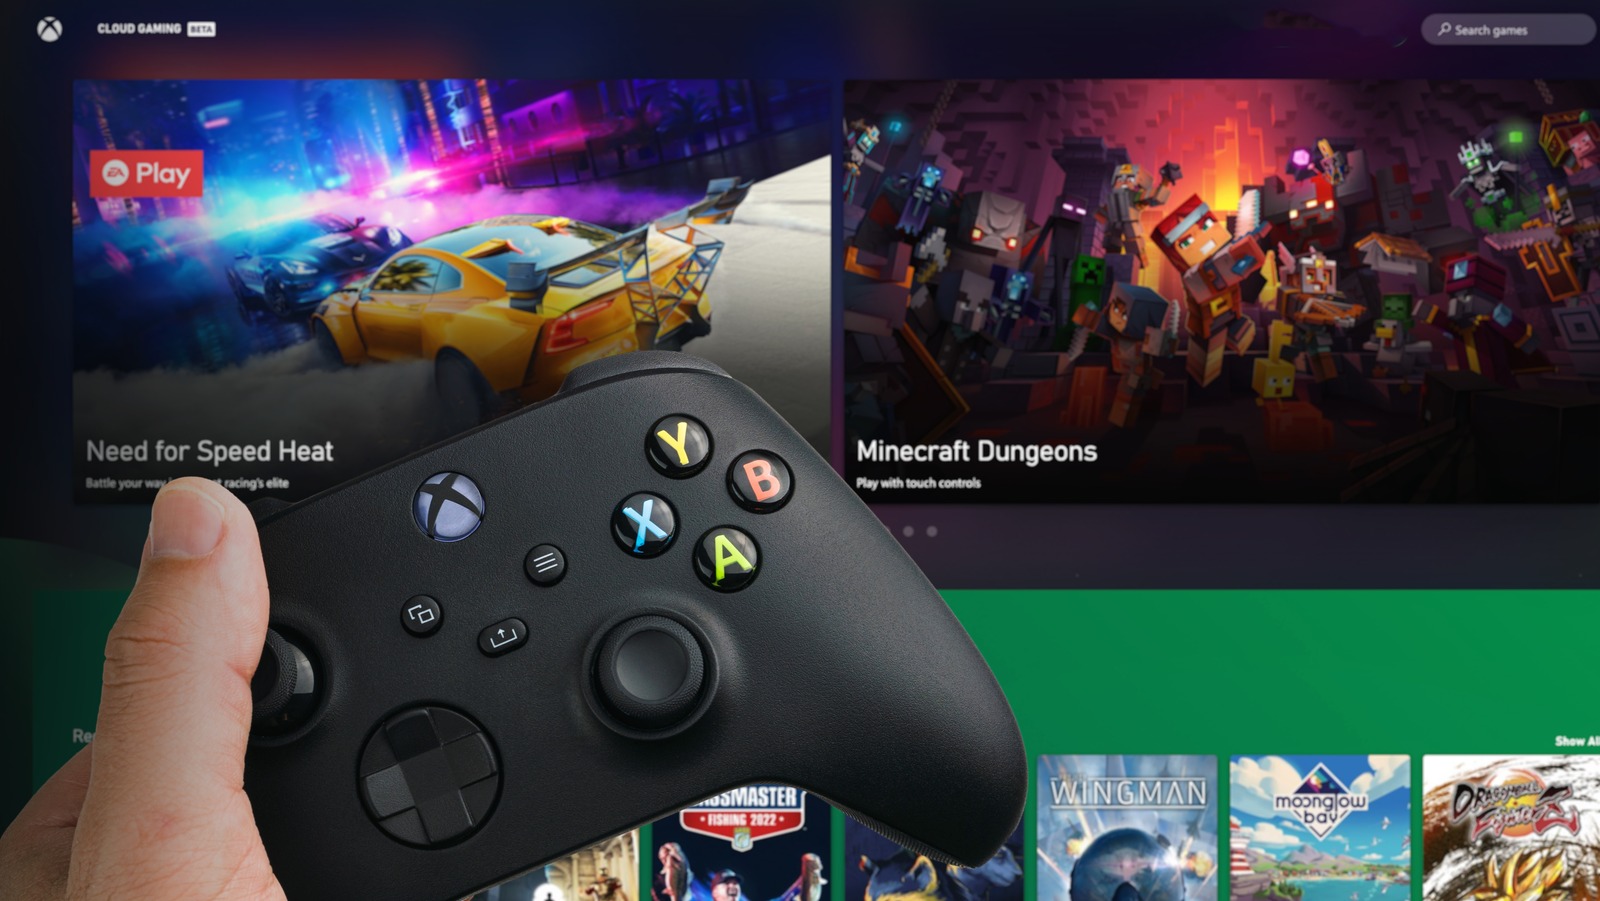 https://www.slashgear.com/img/gallery/5-reasons-you-should-be-using-the-xbox-mobile-app-with-your-series-x/l-intro-1667927179.jpg